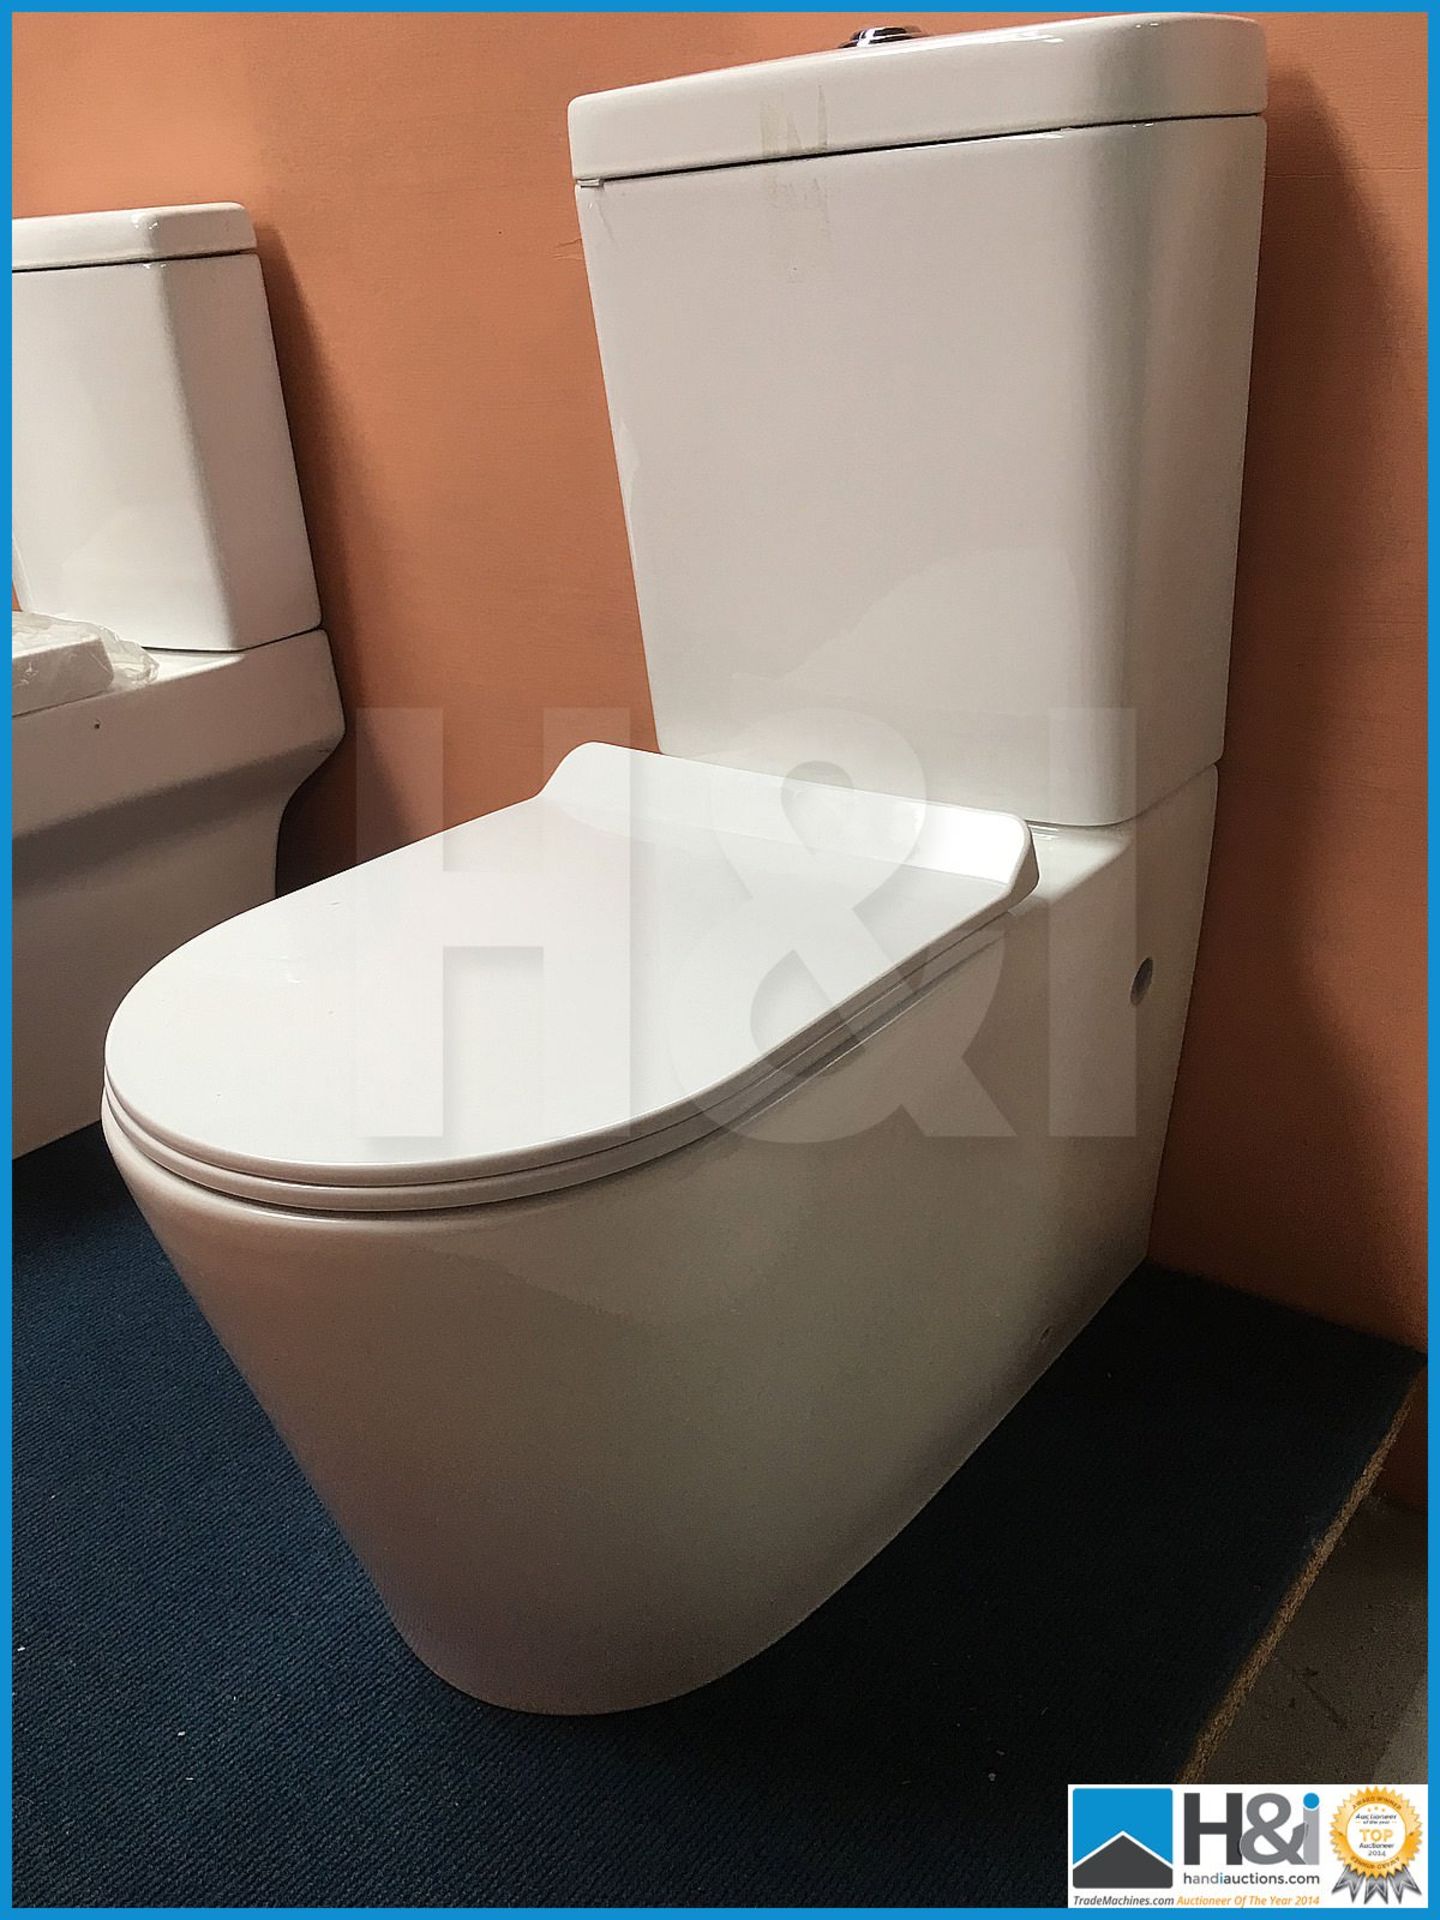 Designer K008 full fascia WC with complimenting thin sandwich soft close seat compete with valve mec